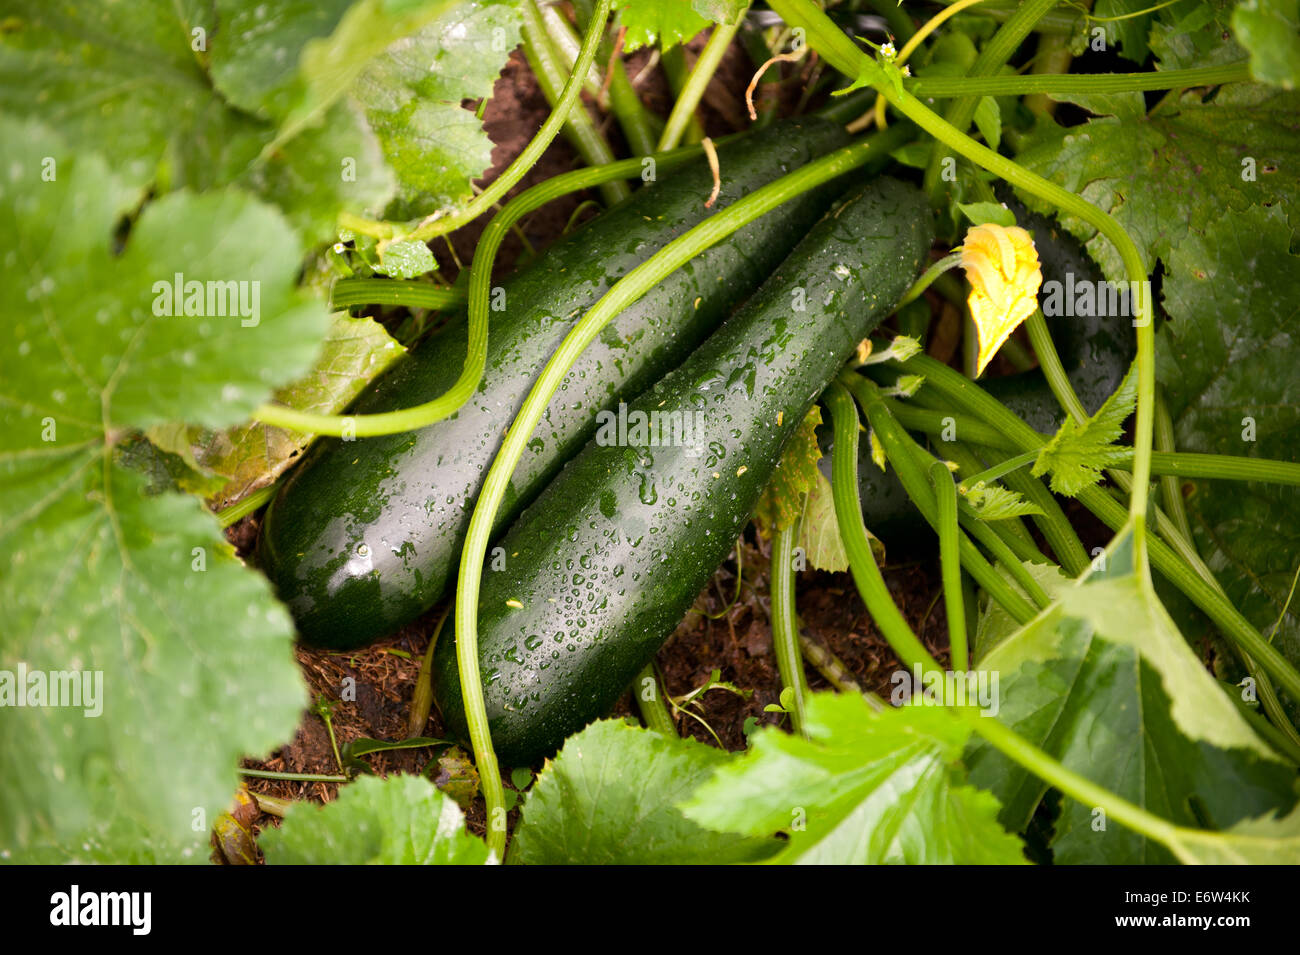 Zucchini or courgette plants grow Stock Photo